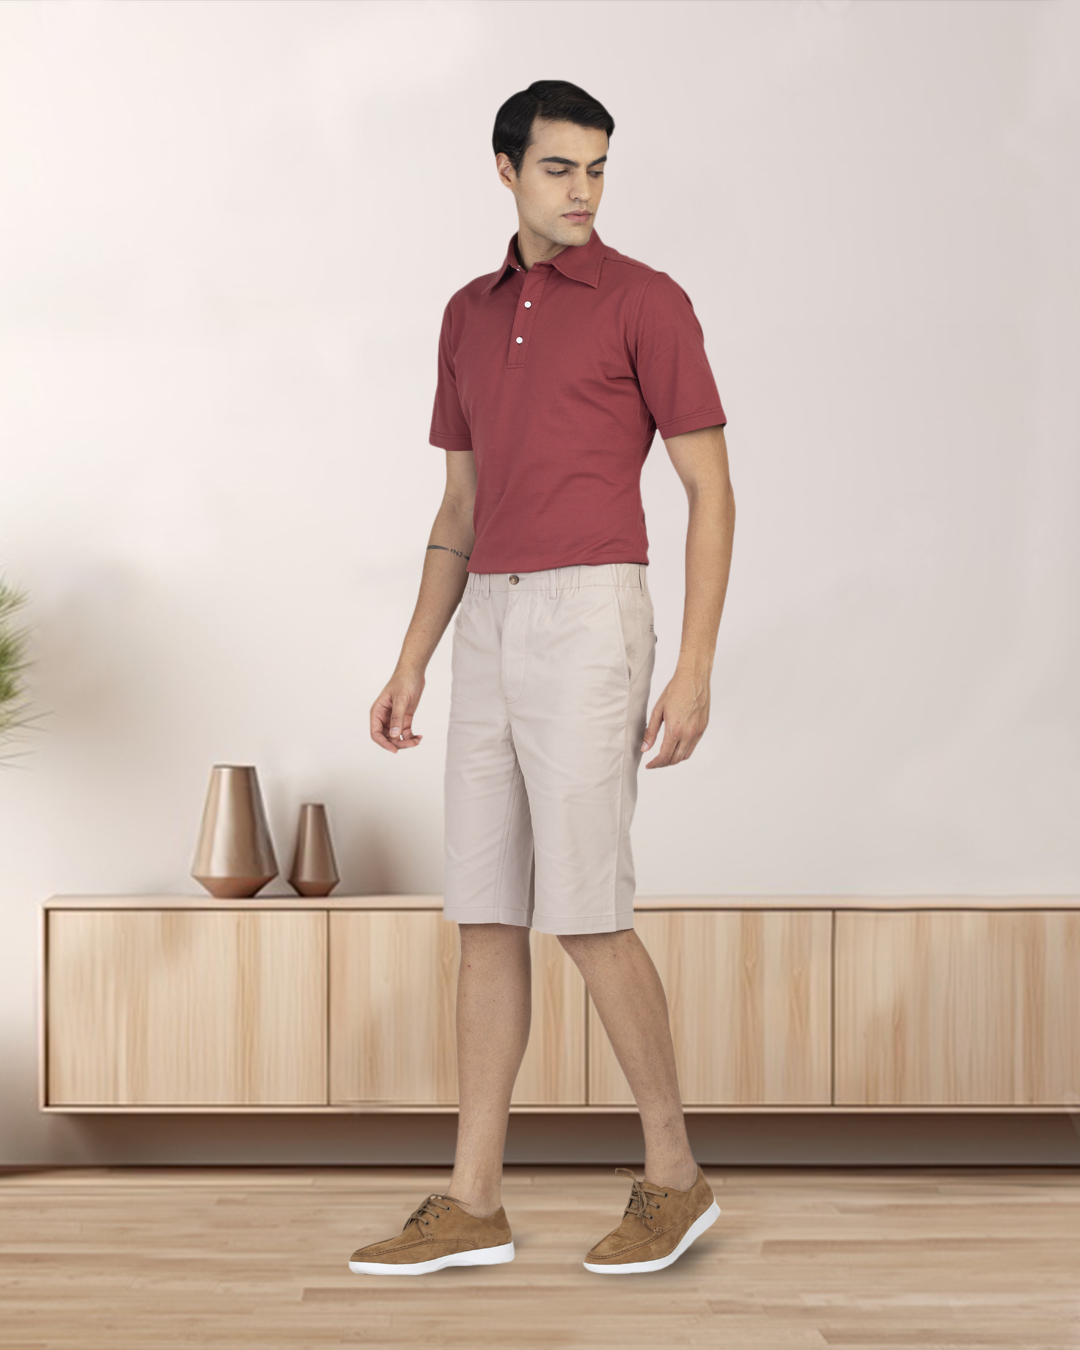 Model wearing custom Genoa shorts for men by Luxire in pale green wearing tan shoes and red top